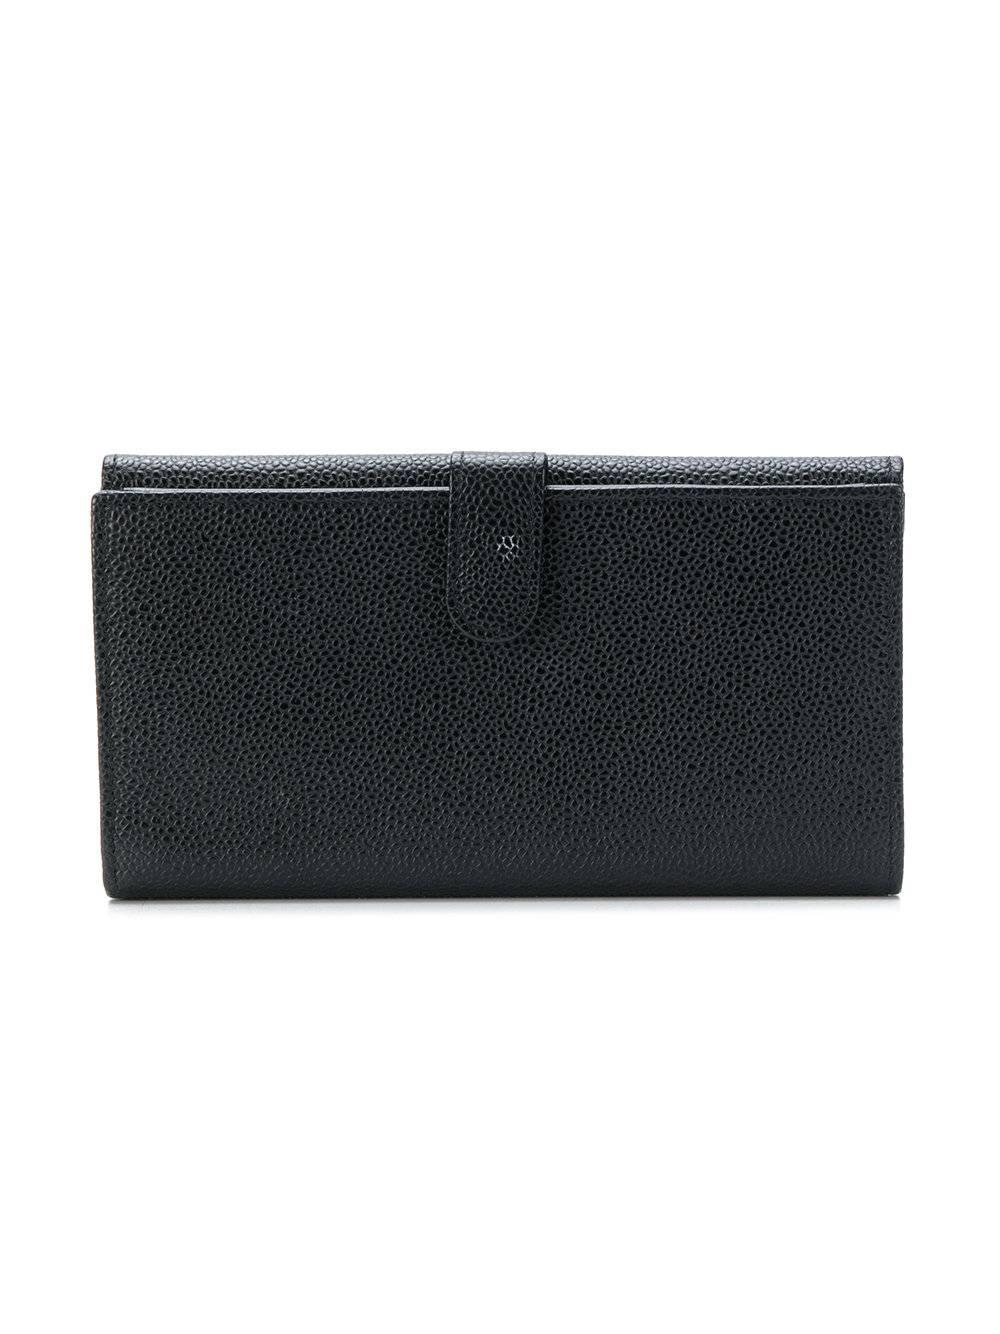 This Chanel wallet is the kind you'll use for years to come, and not just for its timeless silhouette. Expertly crafted in Italy from caviar leather, its bubbled grain is highly scratch resistant for a flawless finish year after year. Its quilted